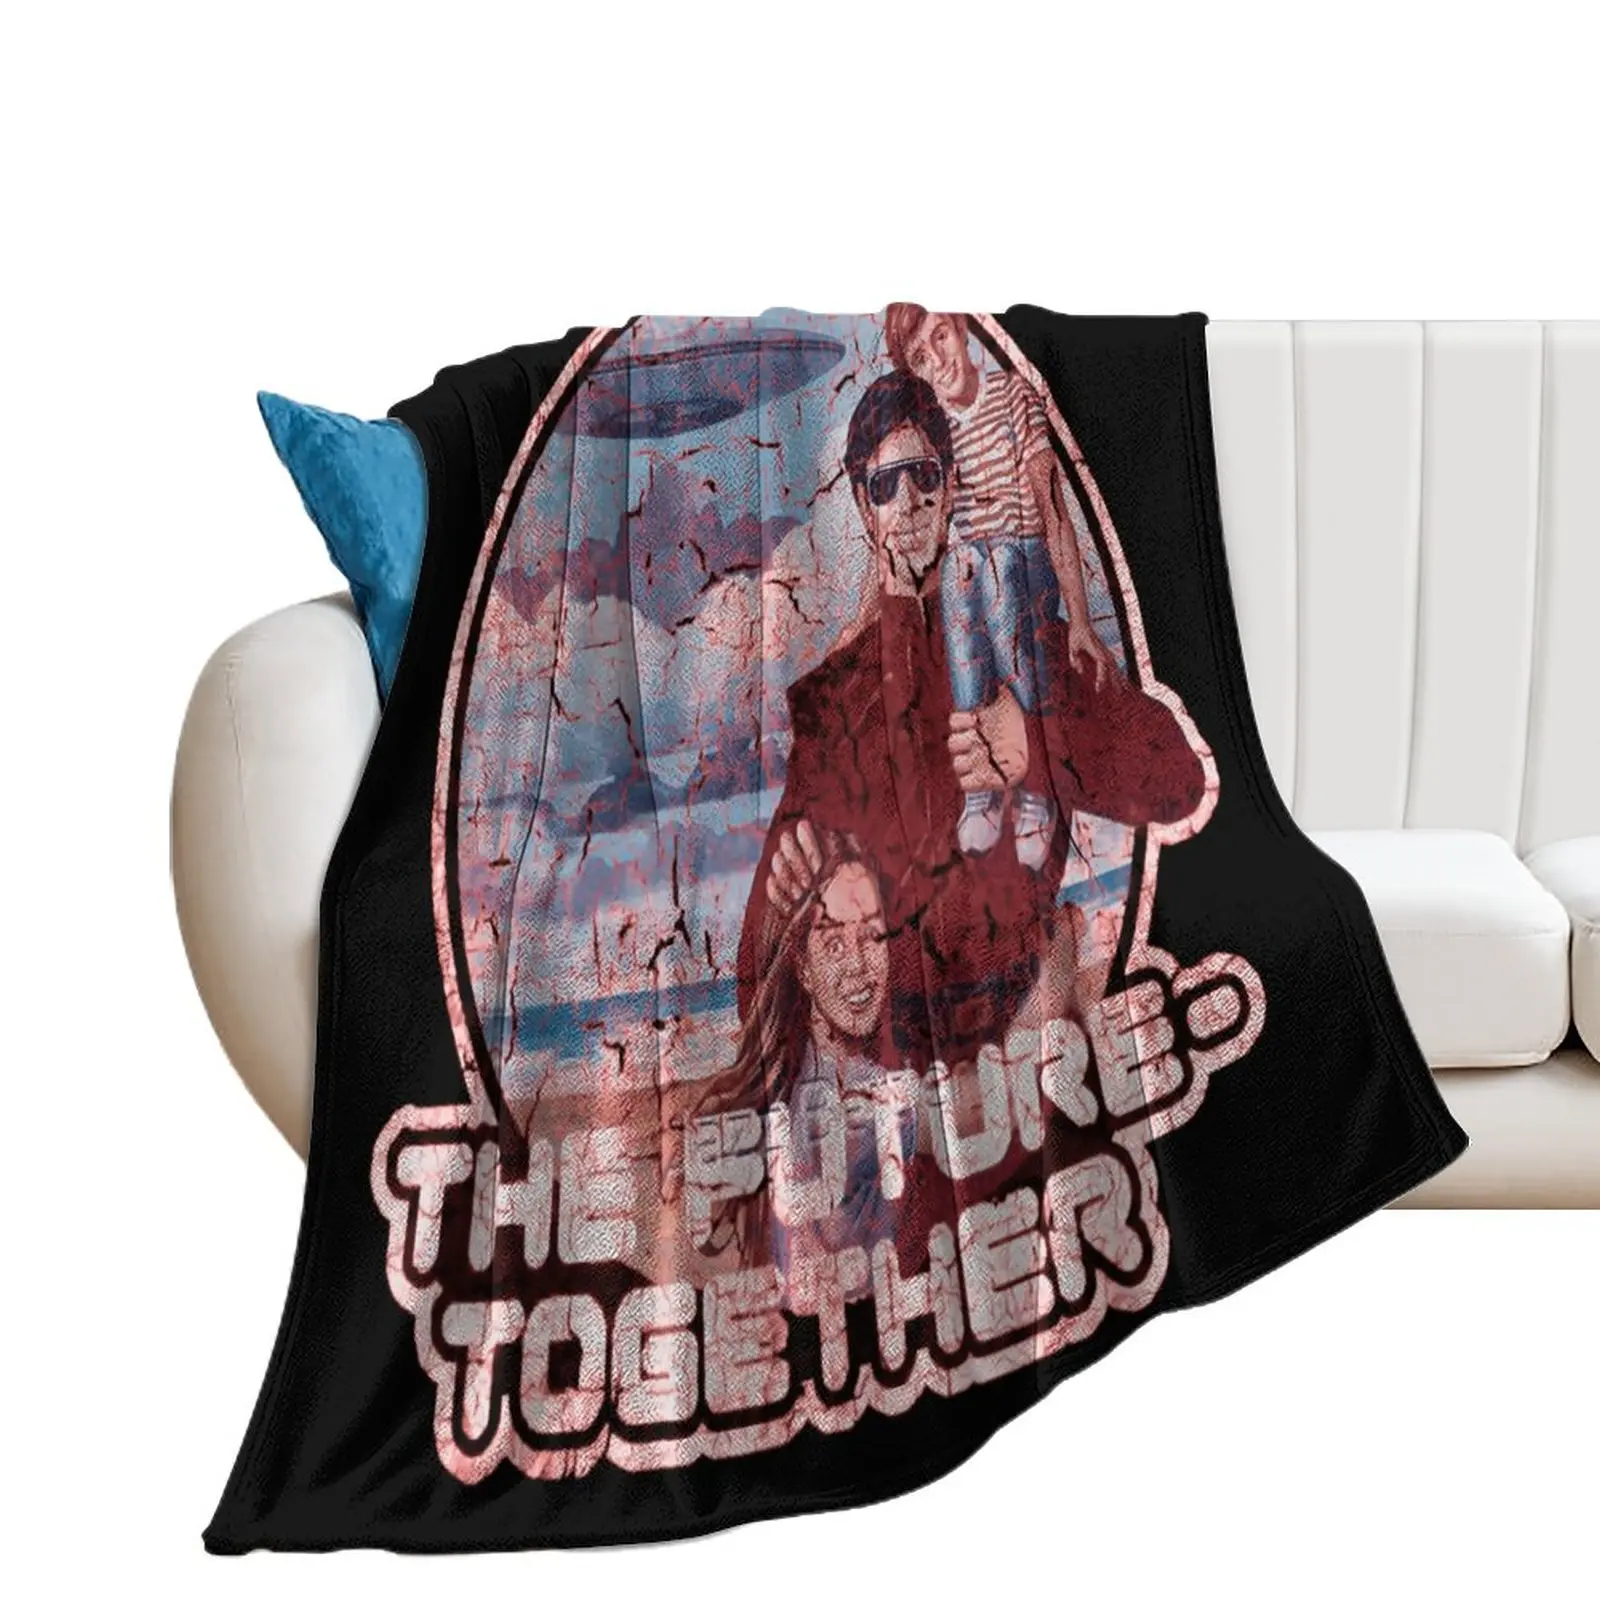 

Travel The Future Together Woolen Blanket Funny Graphic Resist Wrinkling And Great to The Touch Yoga